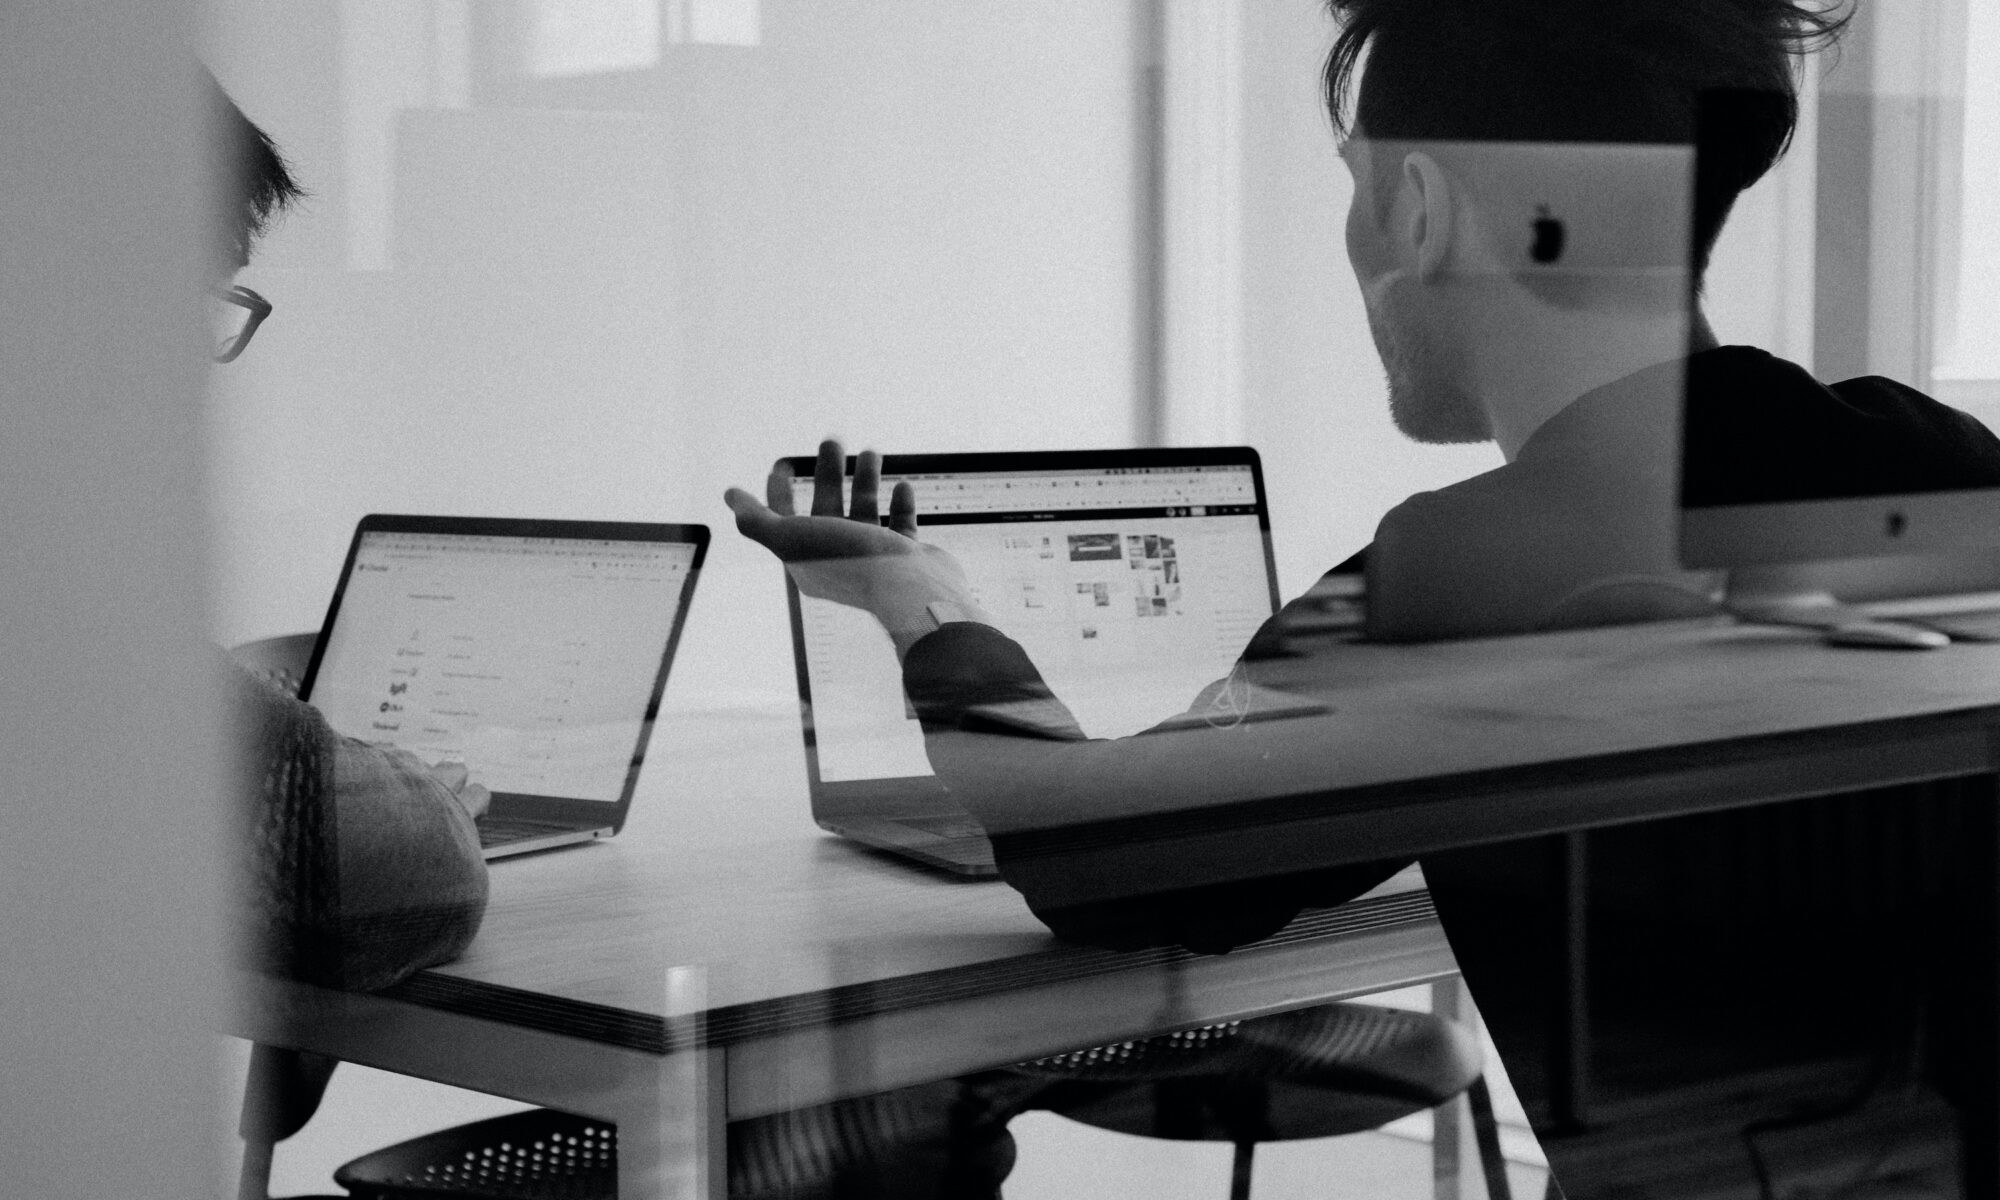 Two men sit in front of laptops discussing something in black and white.